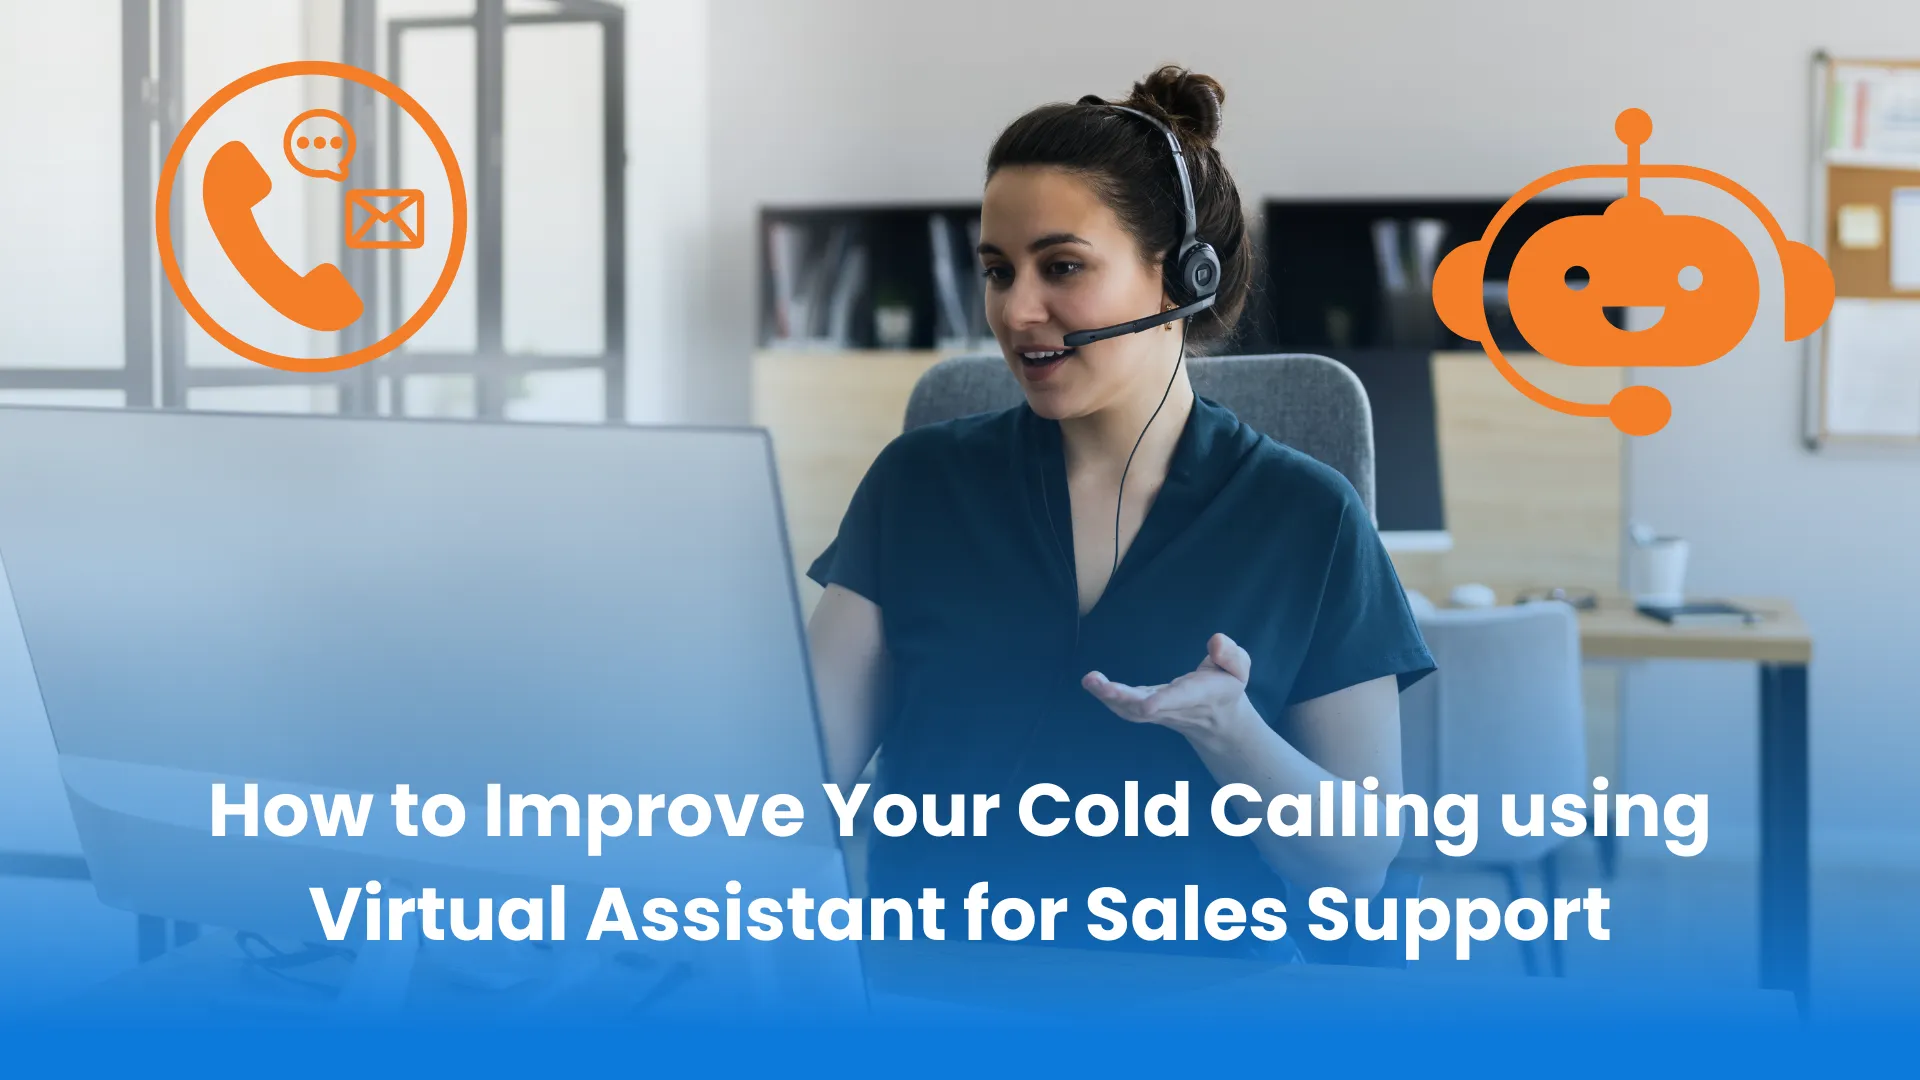 How to Improve Your Cold Calling using Virtual Assistant for Sales Support